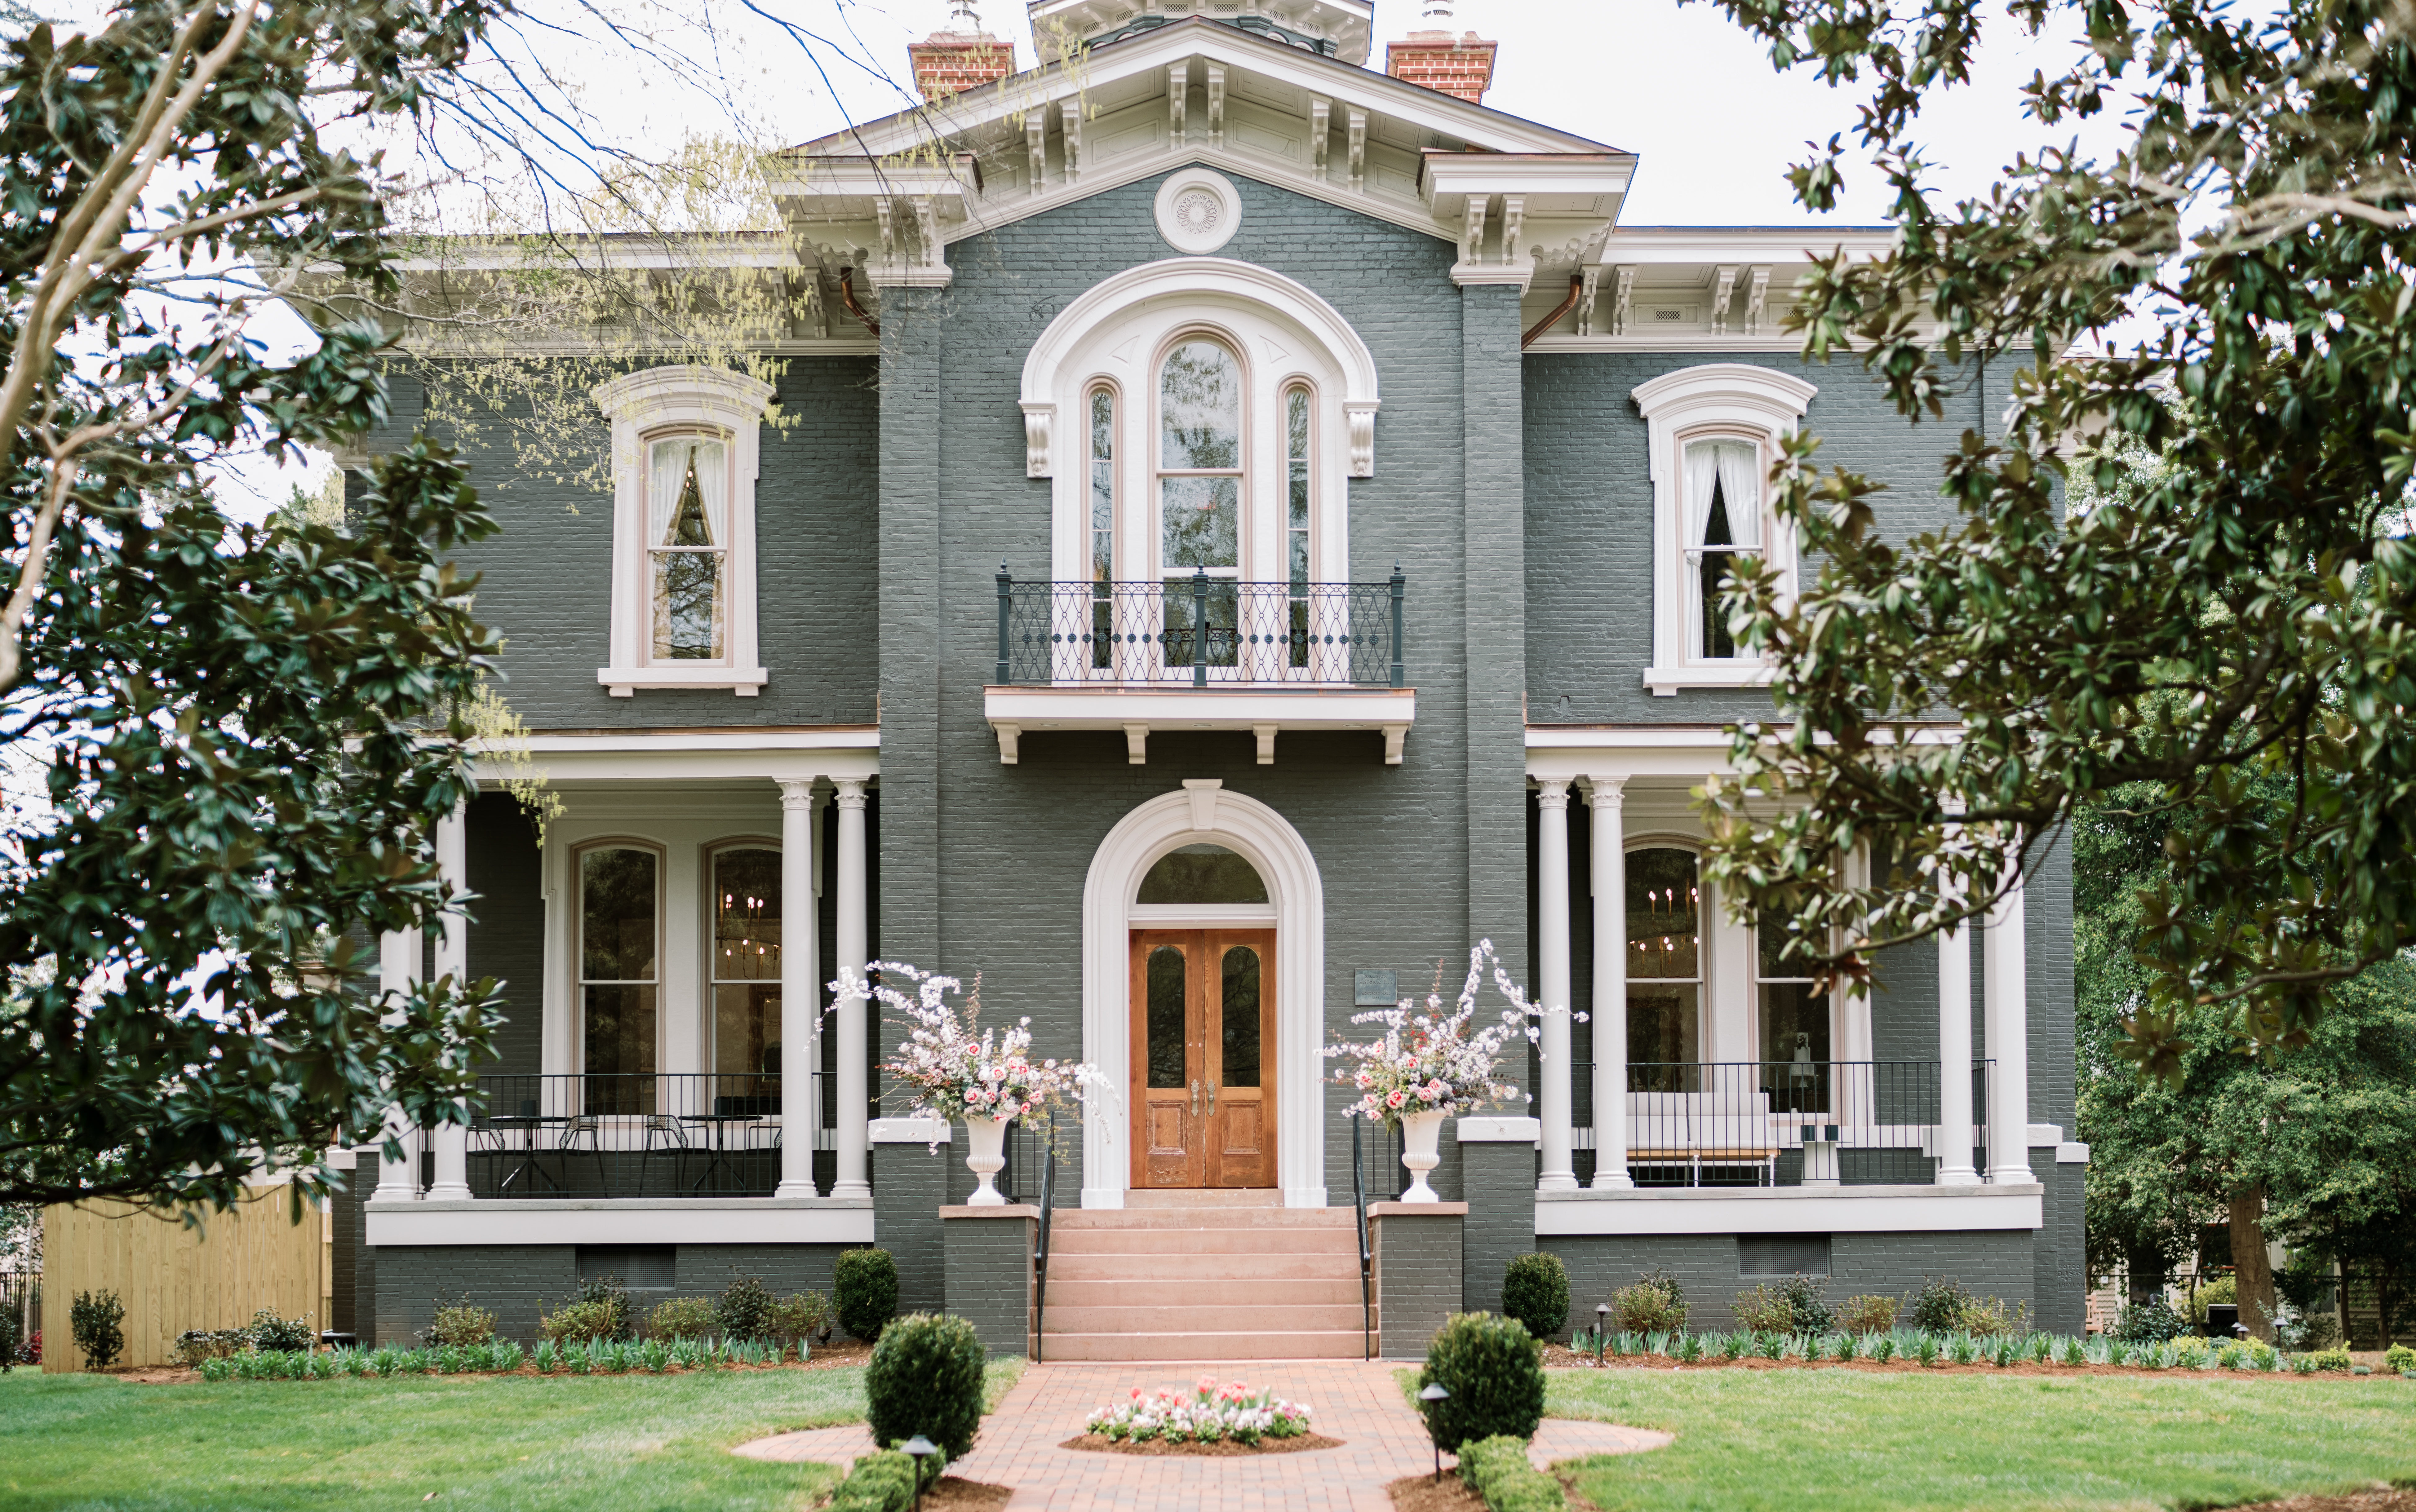 Inviting Hotels That Exude Southern Charm